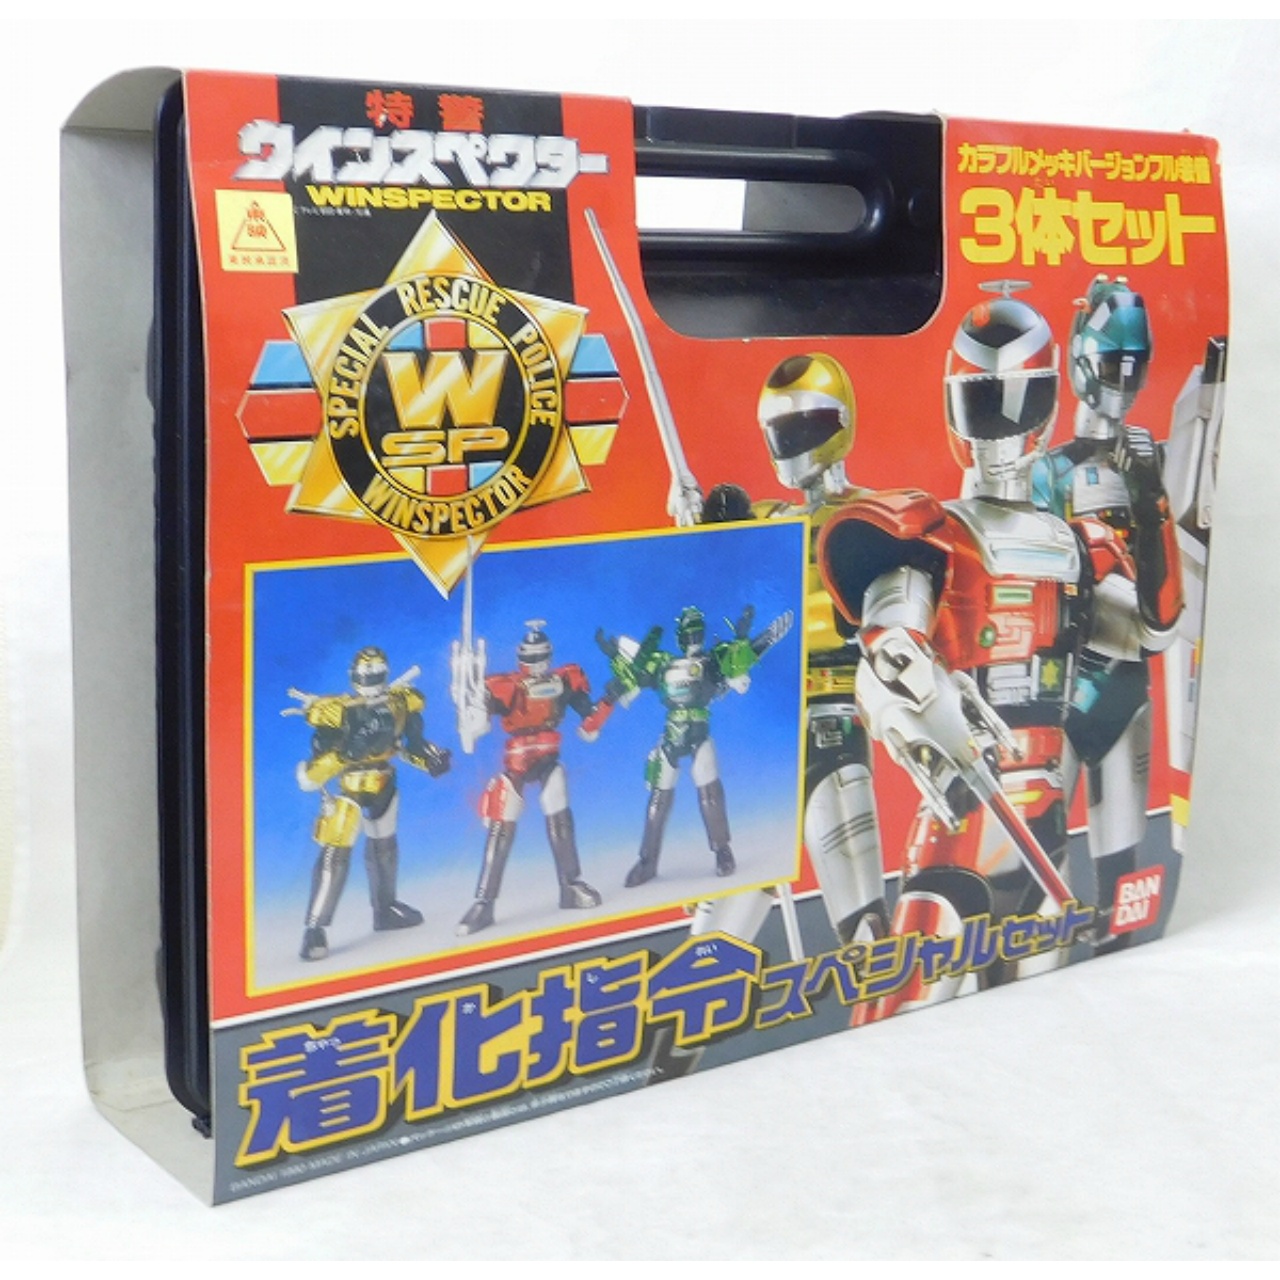 Bandai Special Rescue Police Winspector Suit Mission Special Set